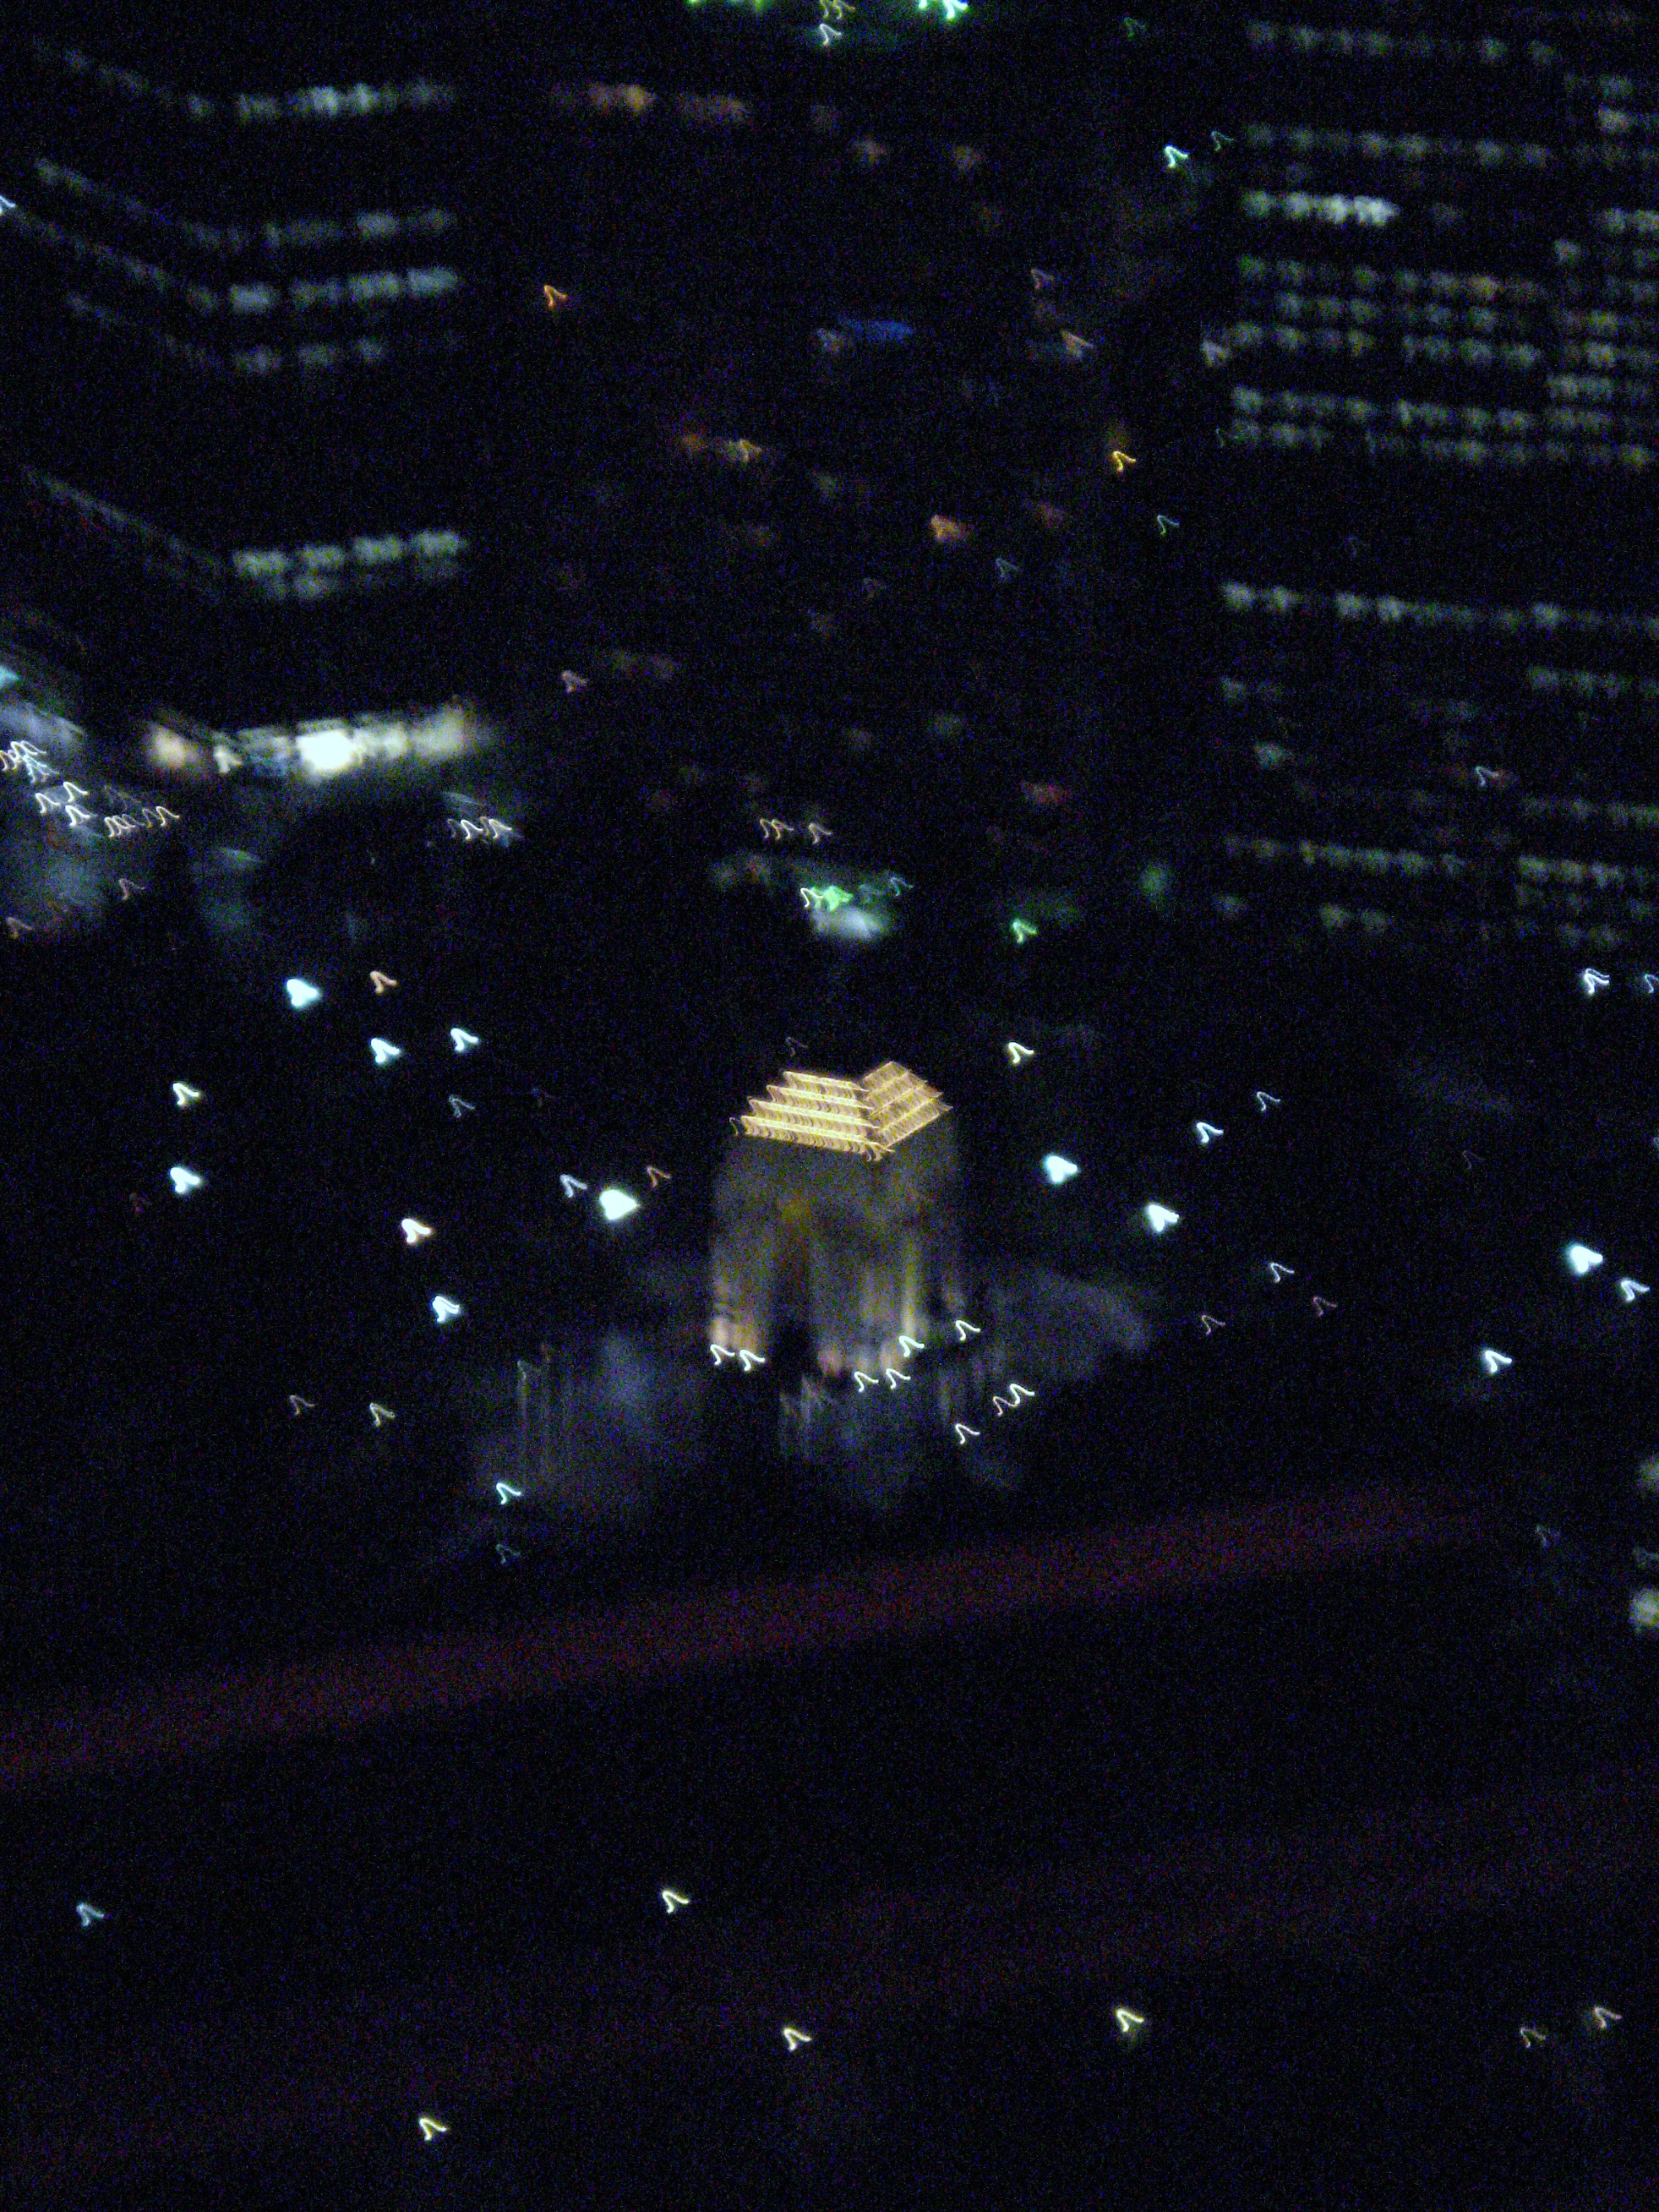 War Memorial at night view from tower